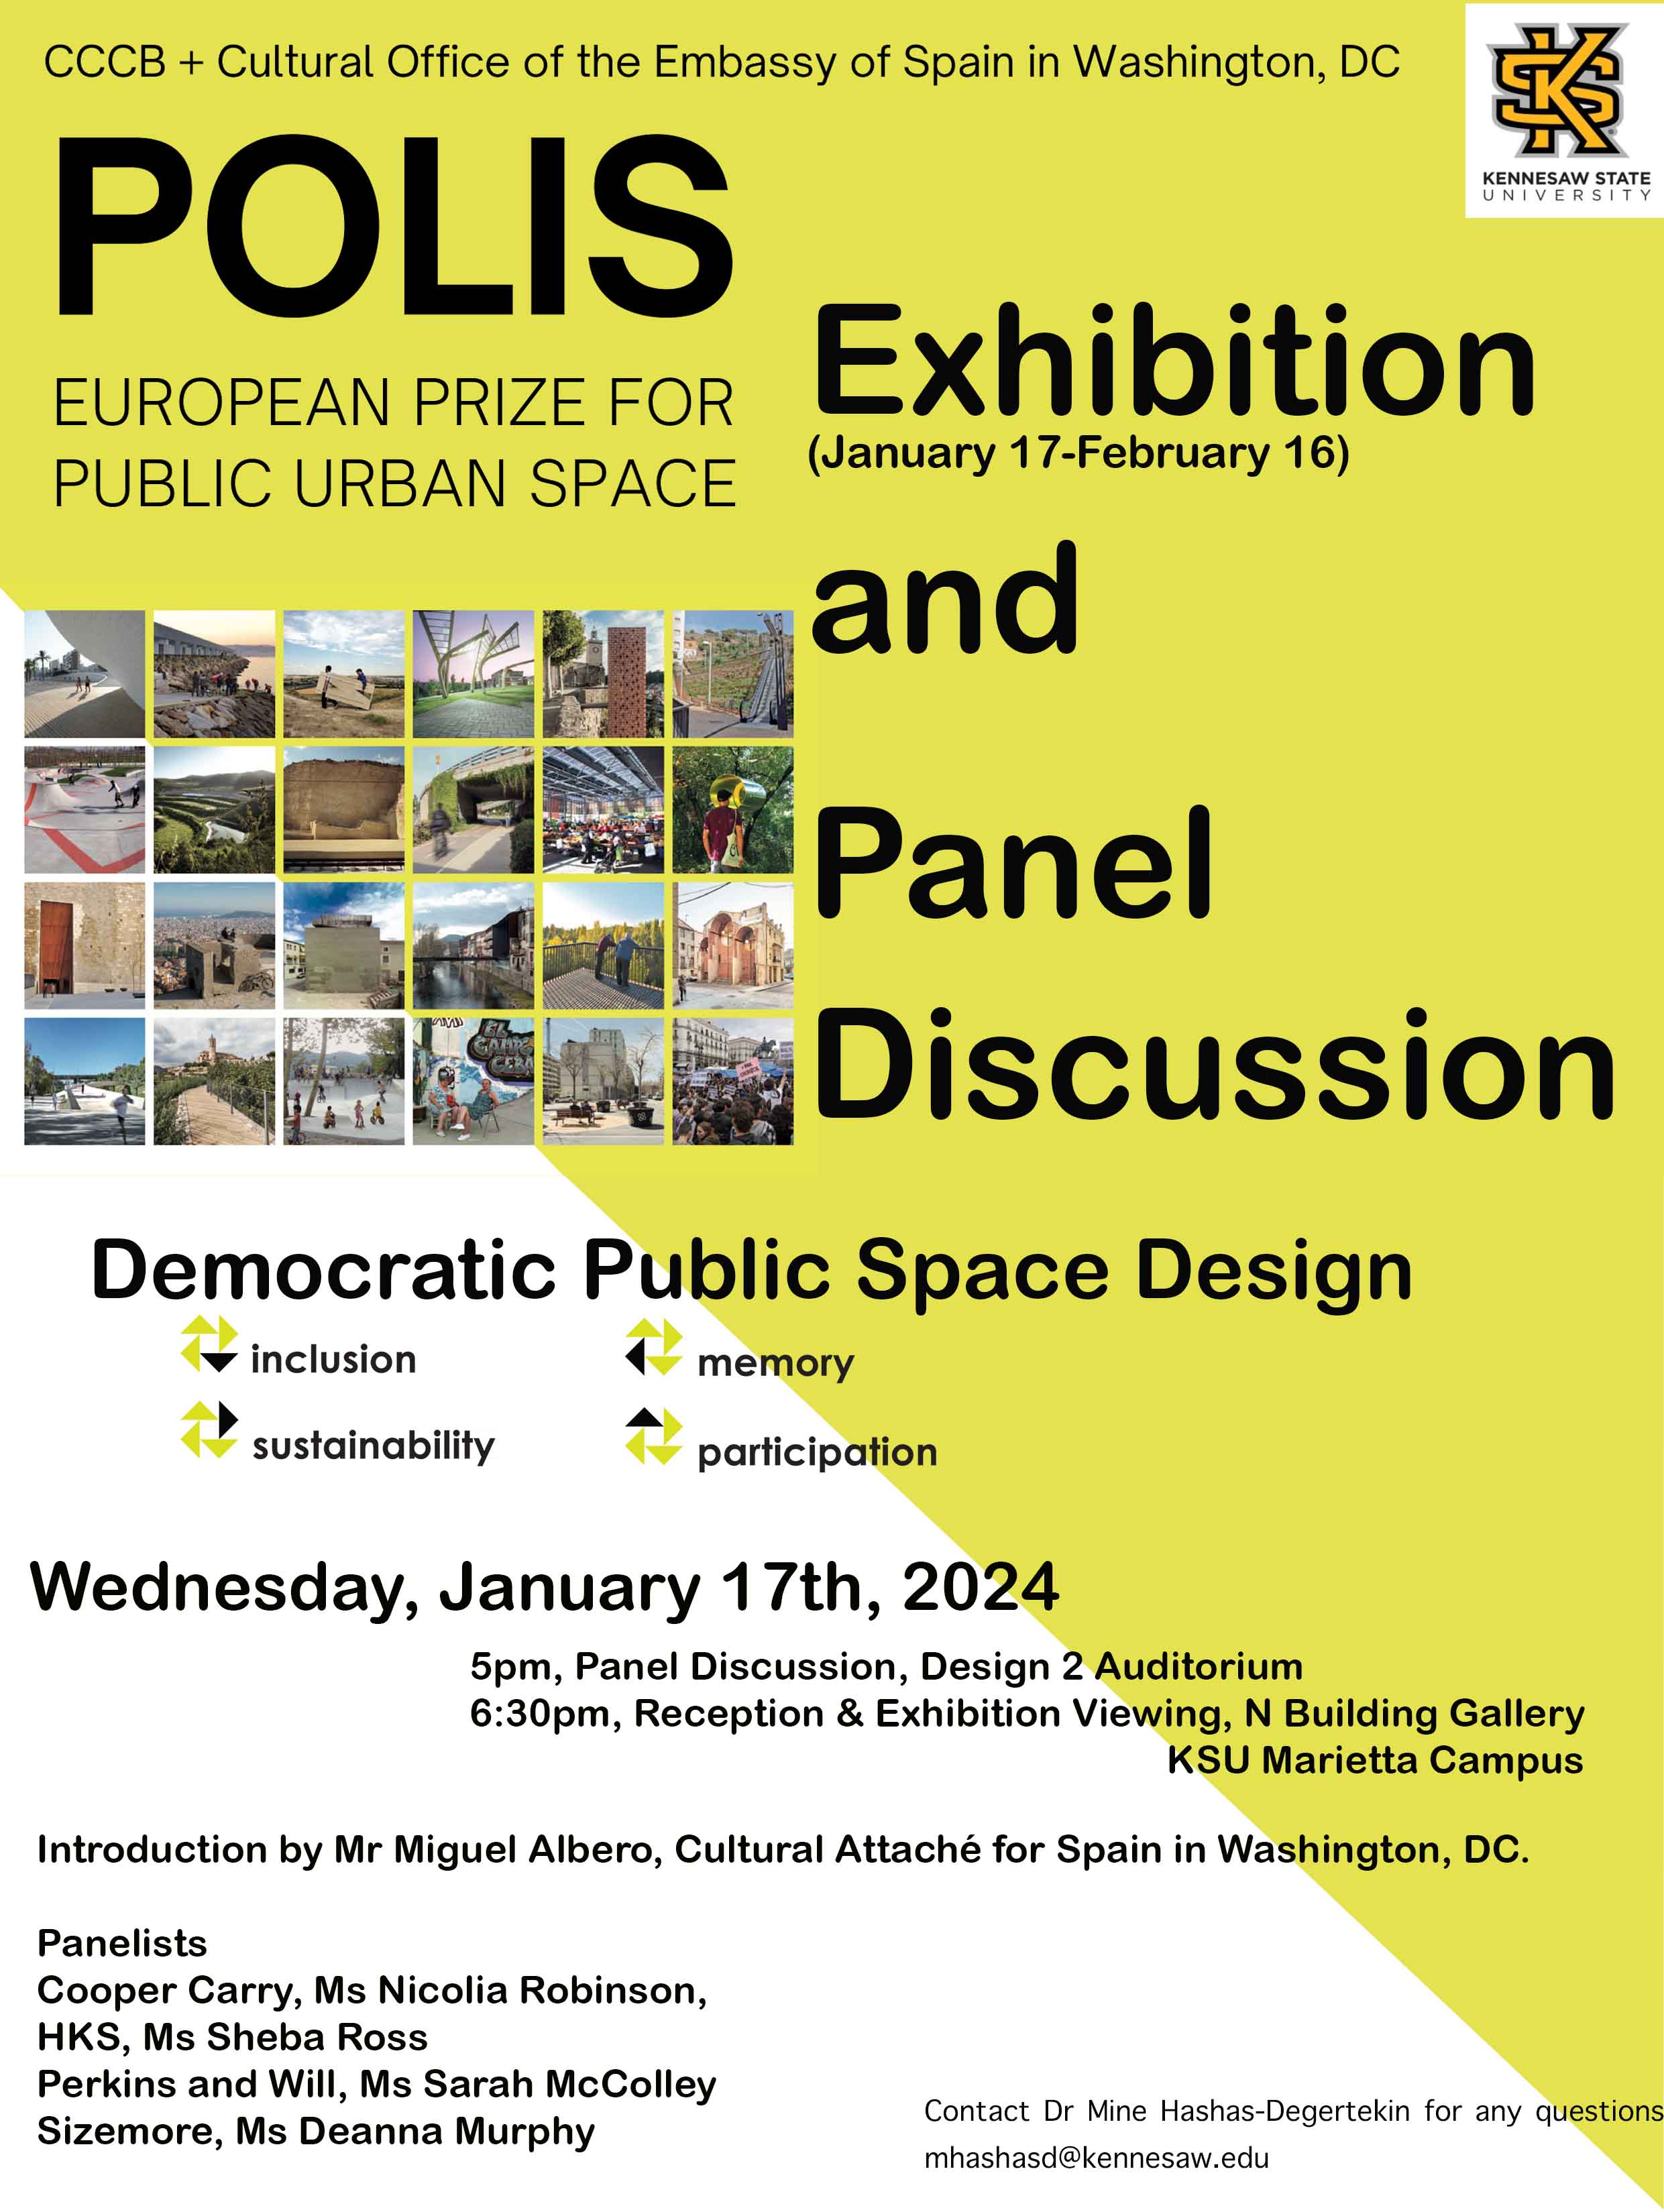 POLIS Exhibition and Panel Discussion